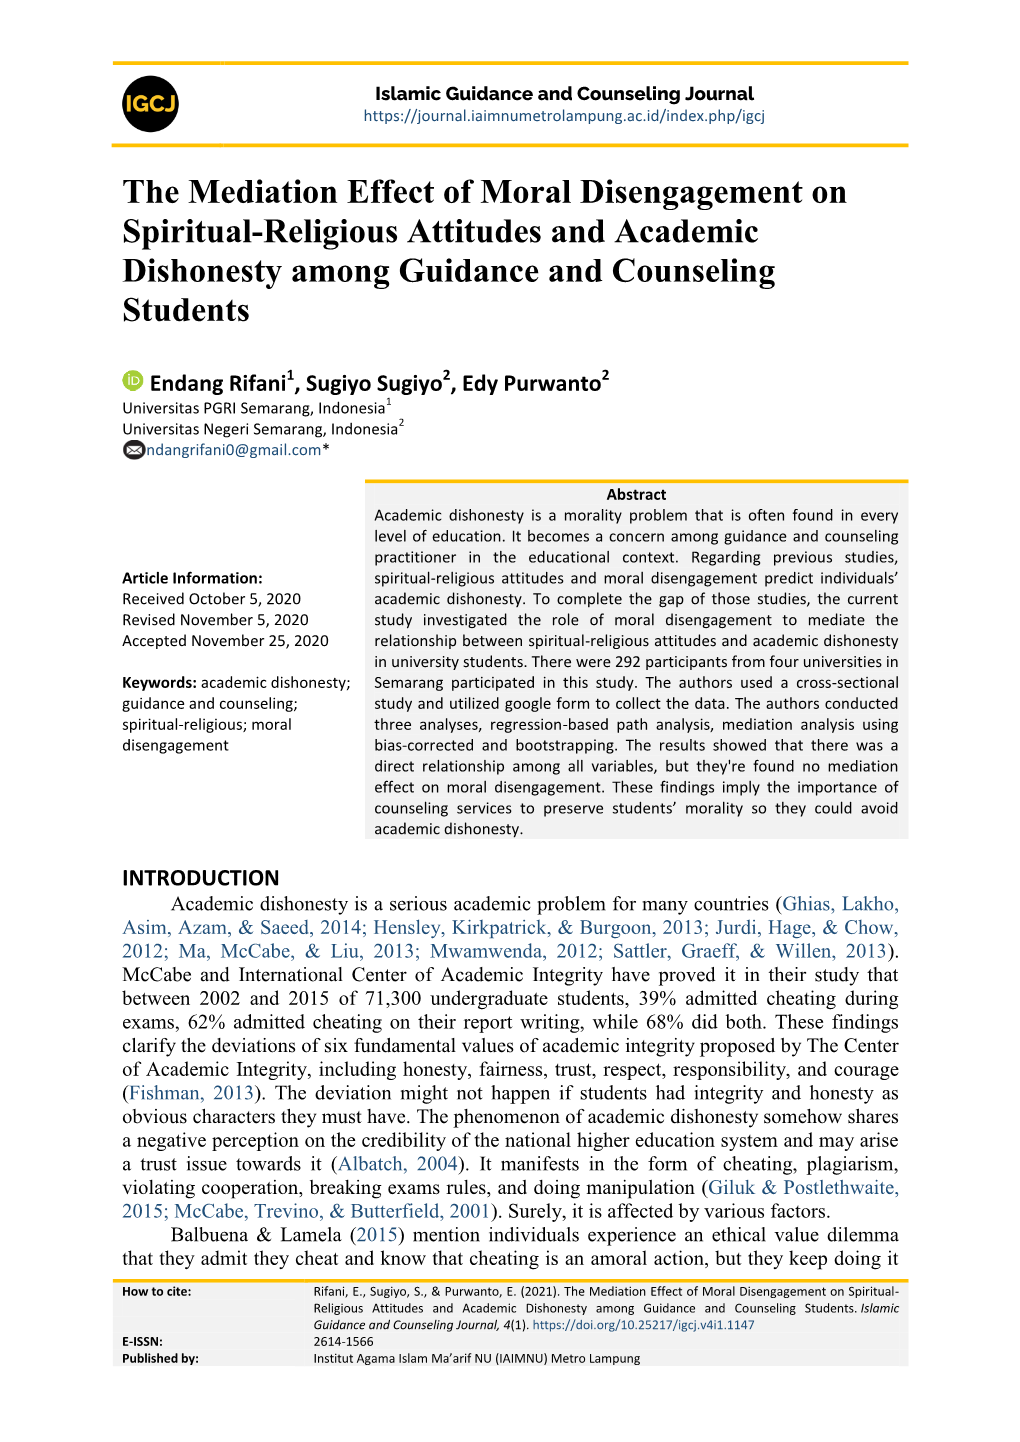 The Mediation Effect of Moral Disengagement on Spiritual-Religious Attitudes and Academic Dishonesty Among Guidance and Counseling Students